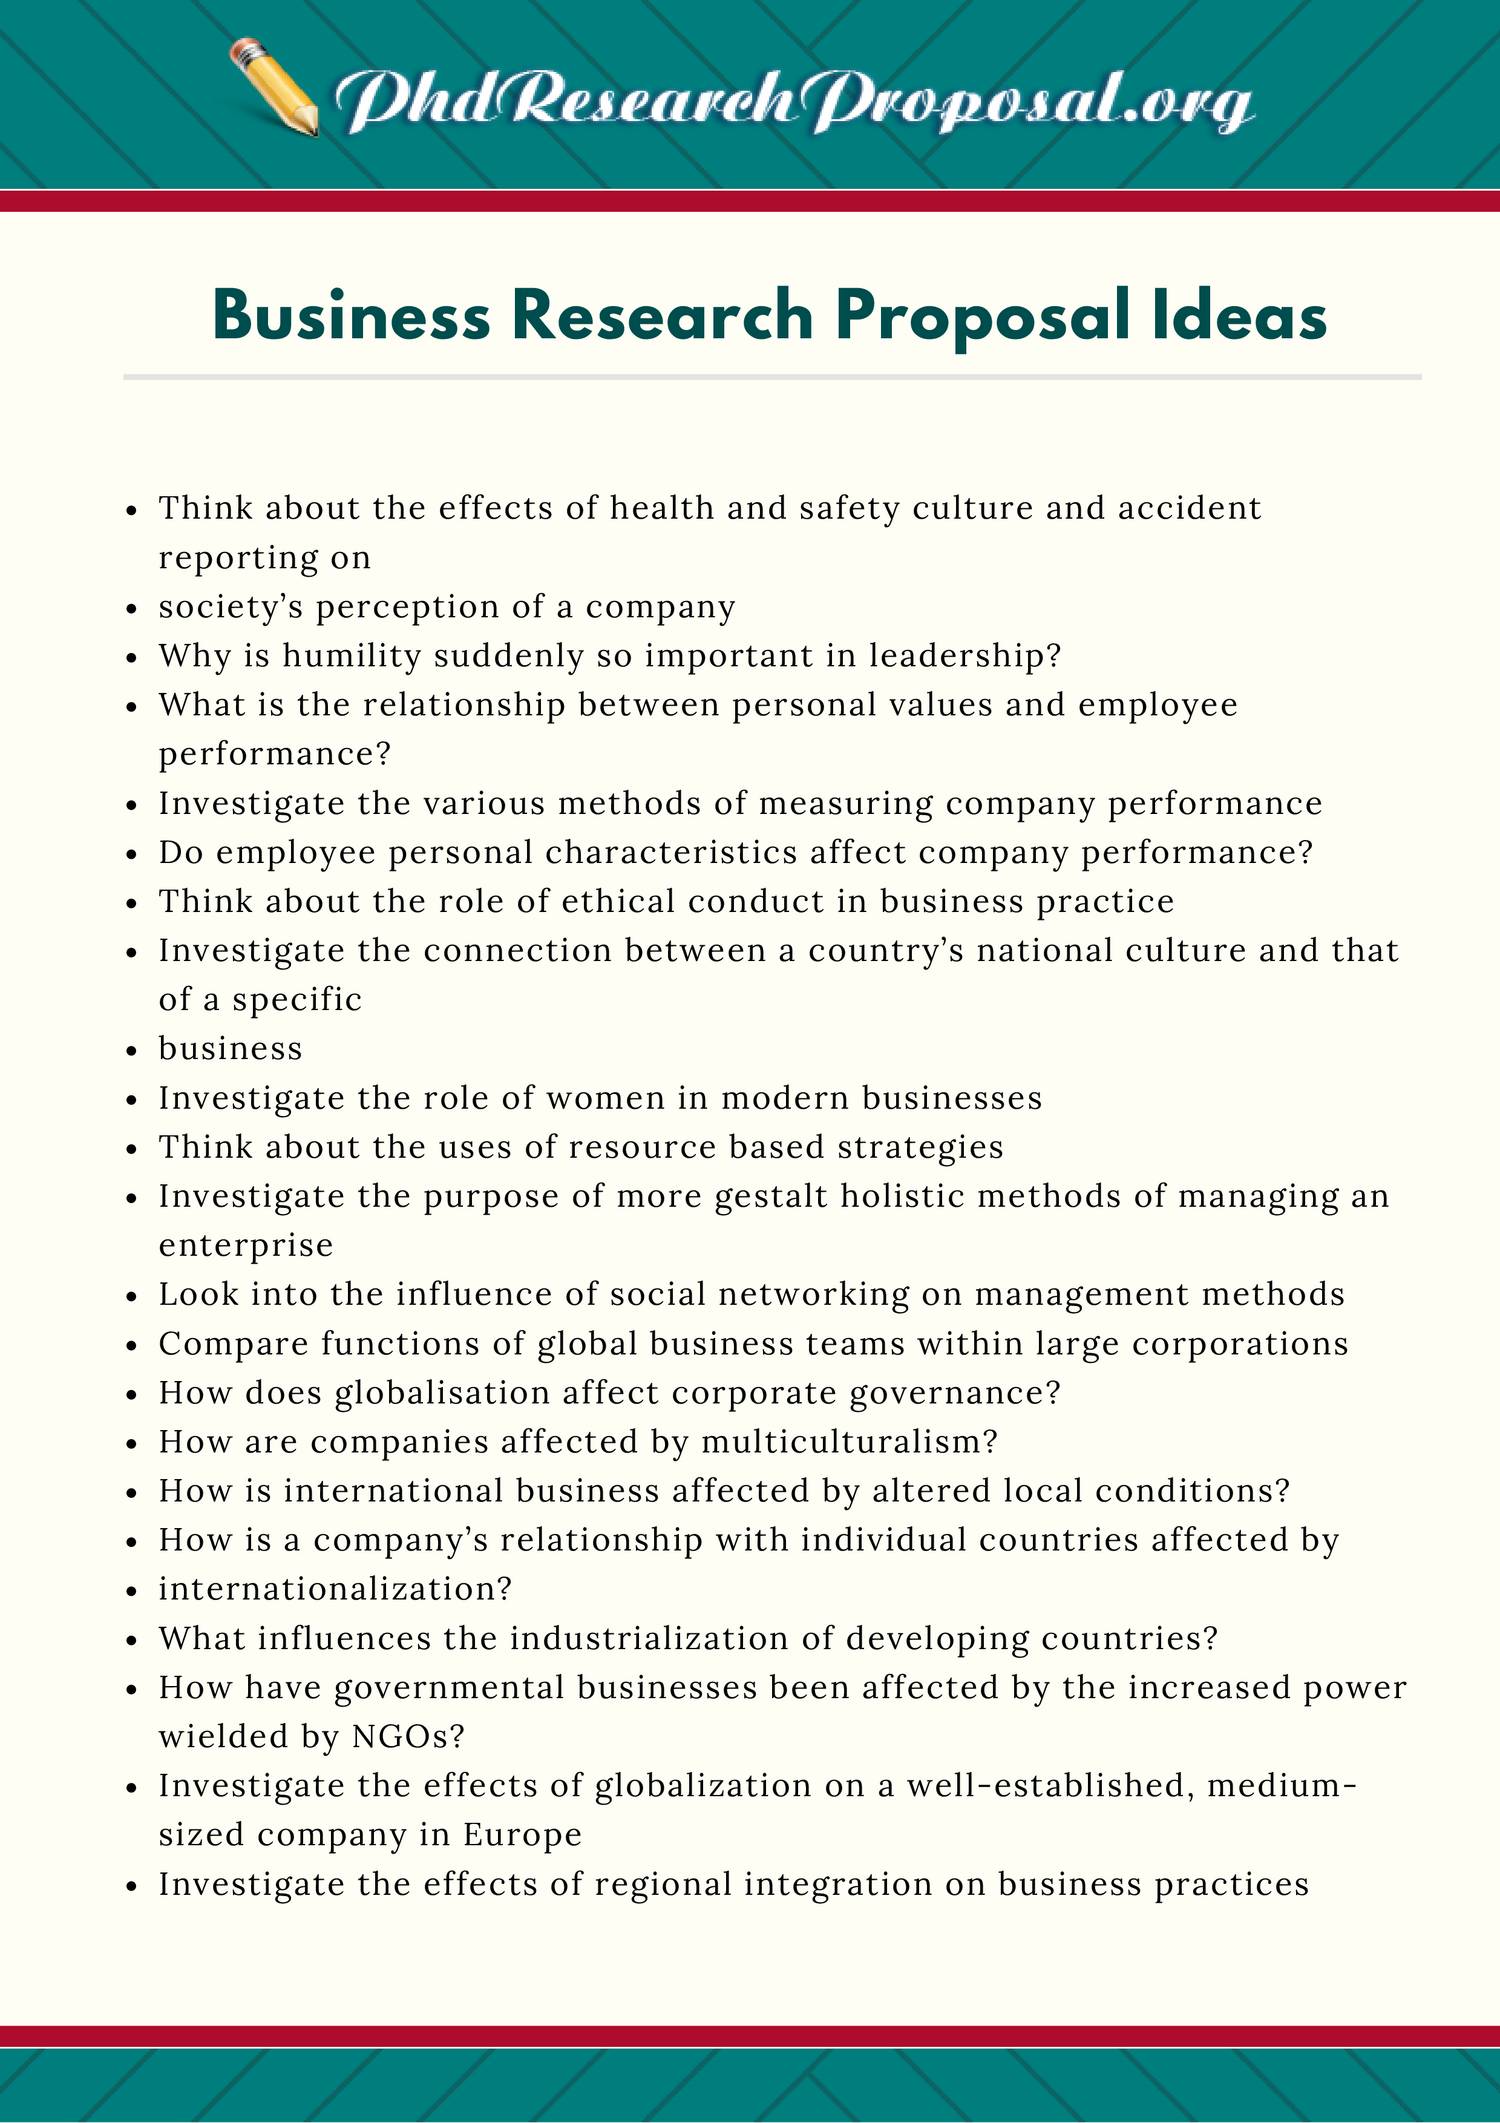 purpose of business research